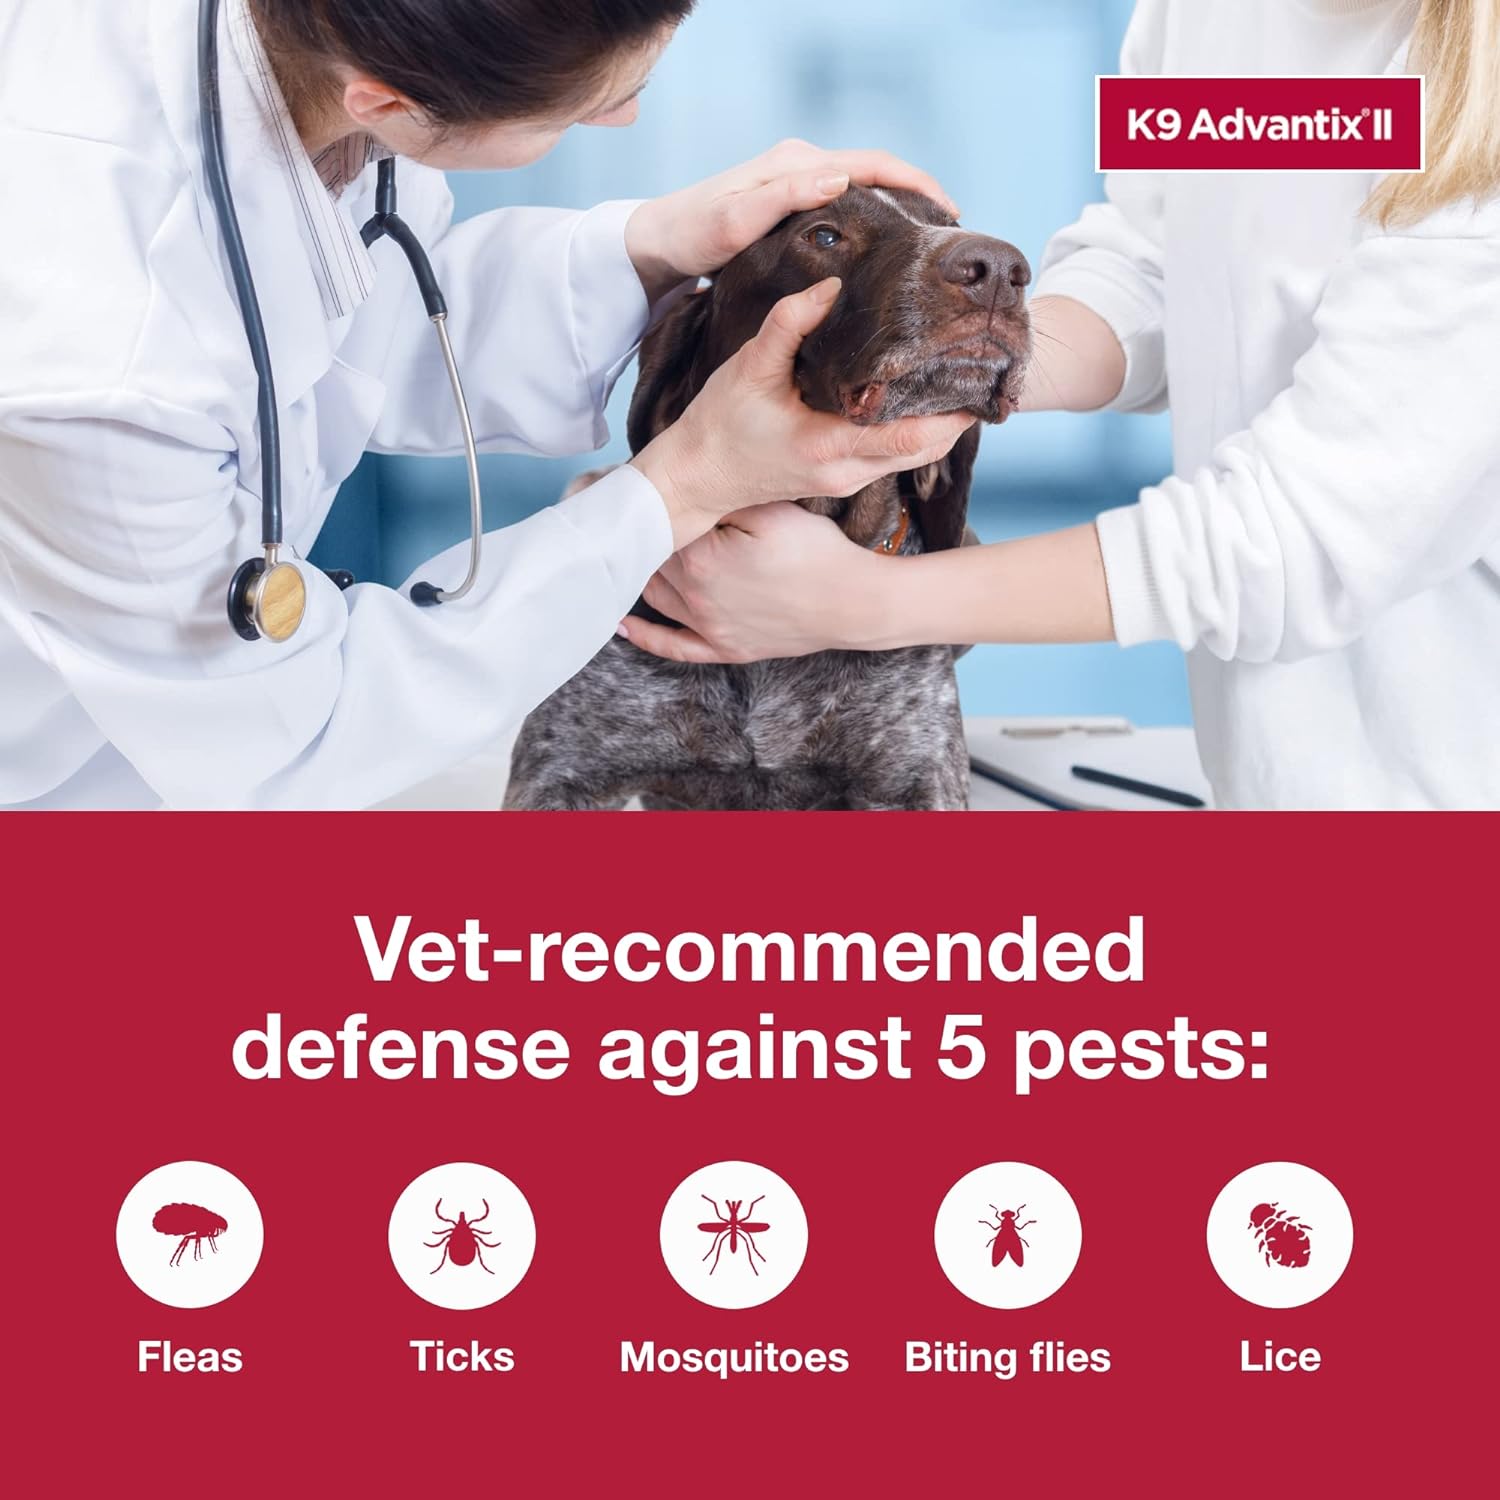 K9 Advantix II XL Dog Vet-Recommended Flea, Tick & Mosquito Treatment & Prevention | Dogs Over 55 lbs. | 1-Mo Supply : Electronics